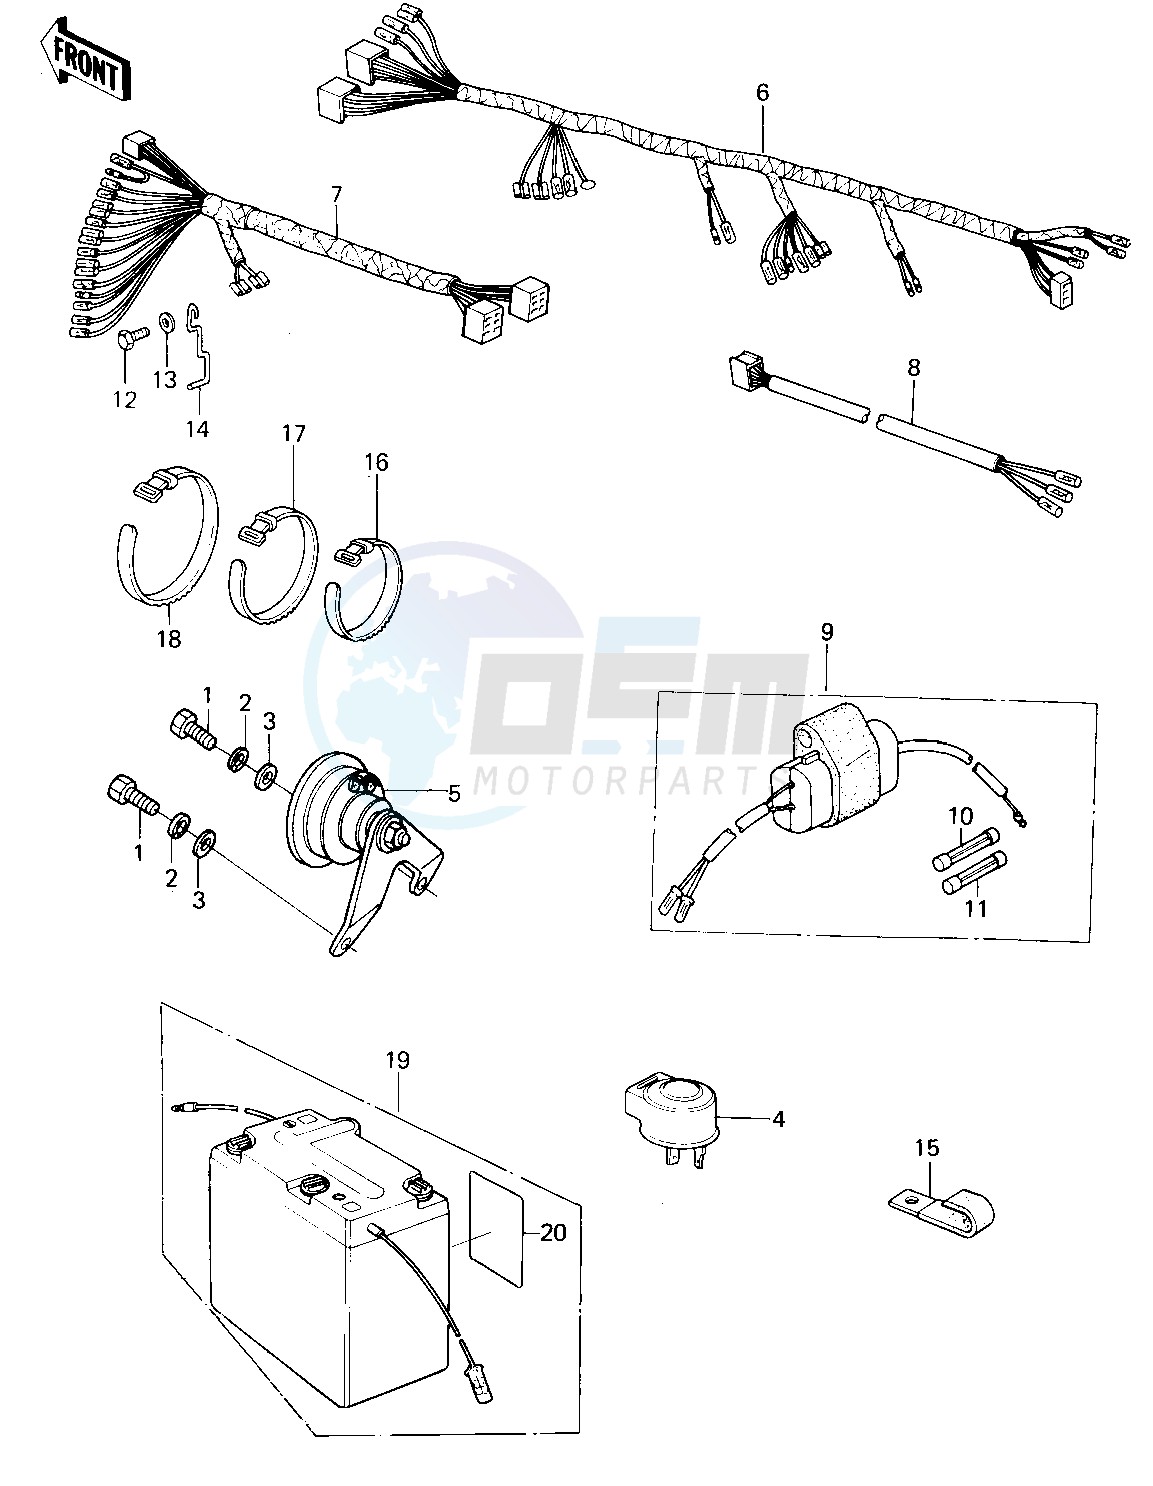 CHASSIS ELECTRICAL EQUIPMENT -- 80-81 KL250-A3_A4- - blueprint